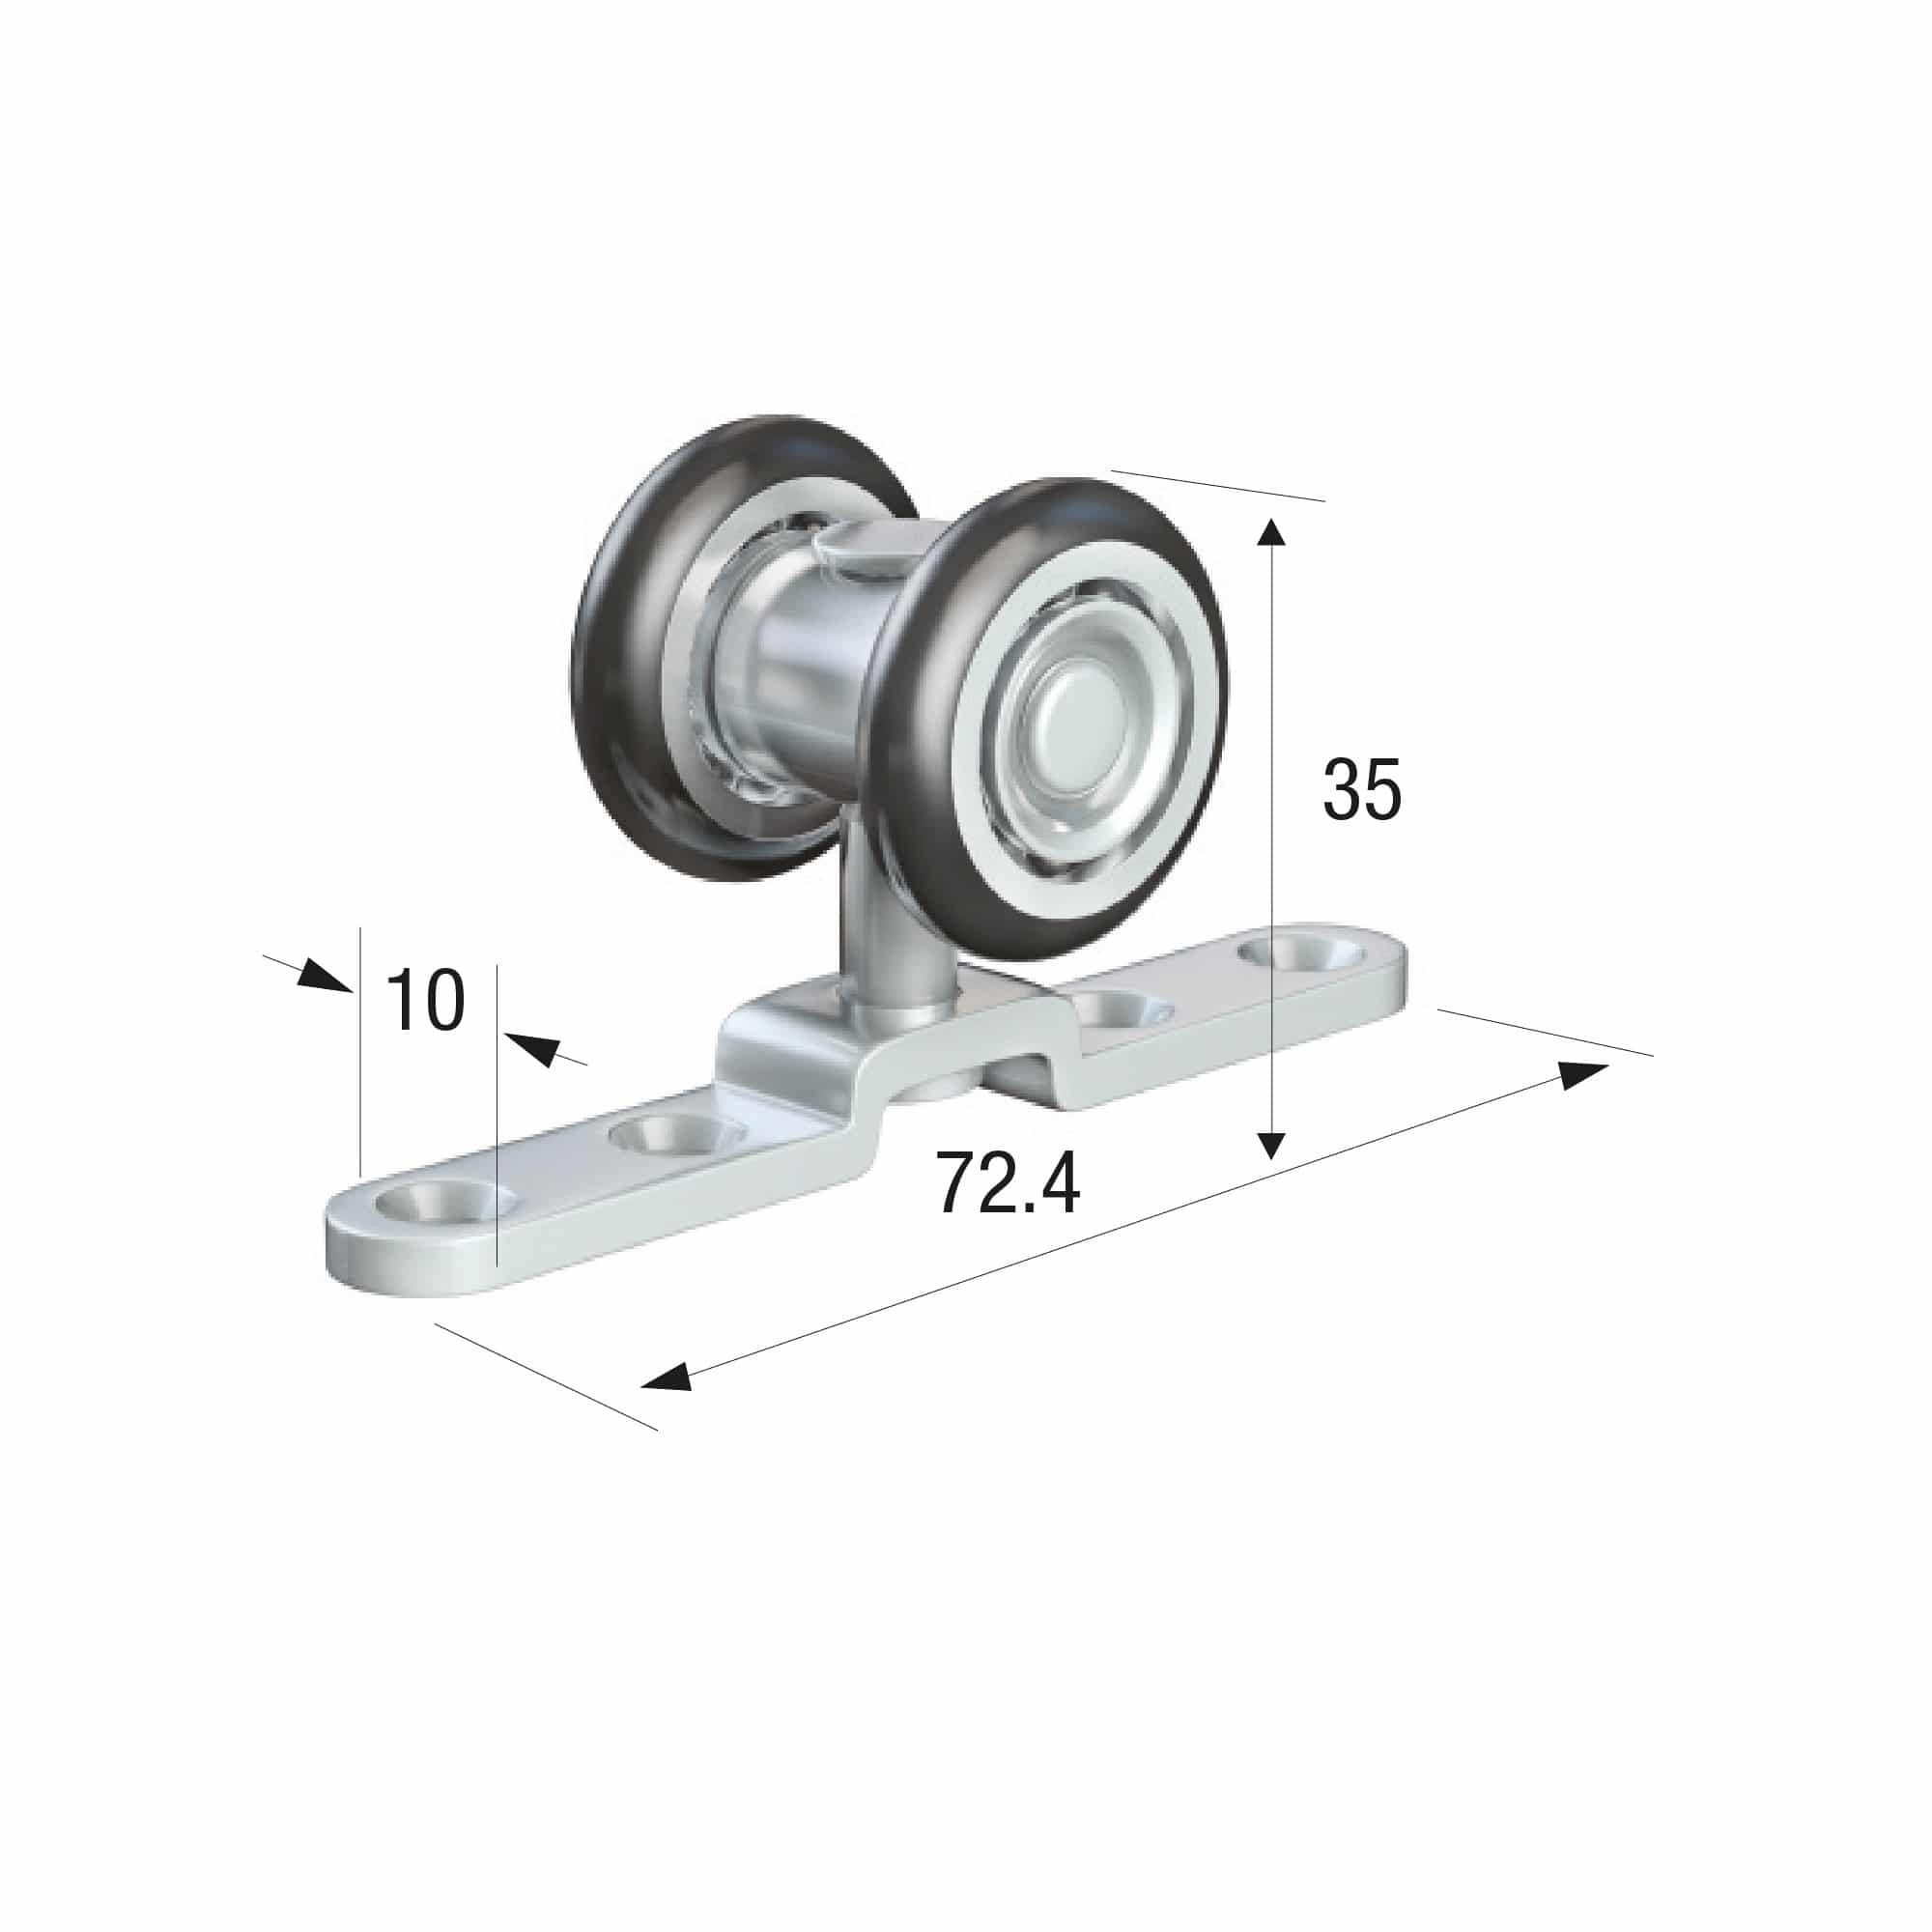 Series 20 Single Axle Rotating Nylon Wheel Hanger With Top Mounting Plate, 33Kg Capacity